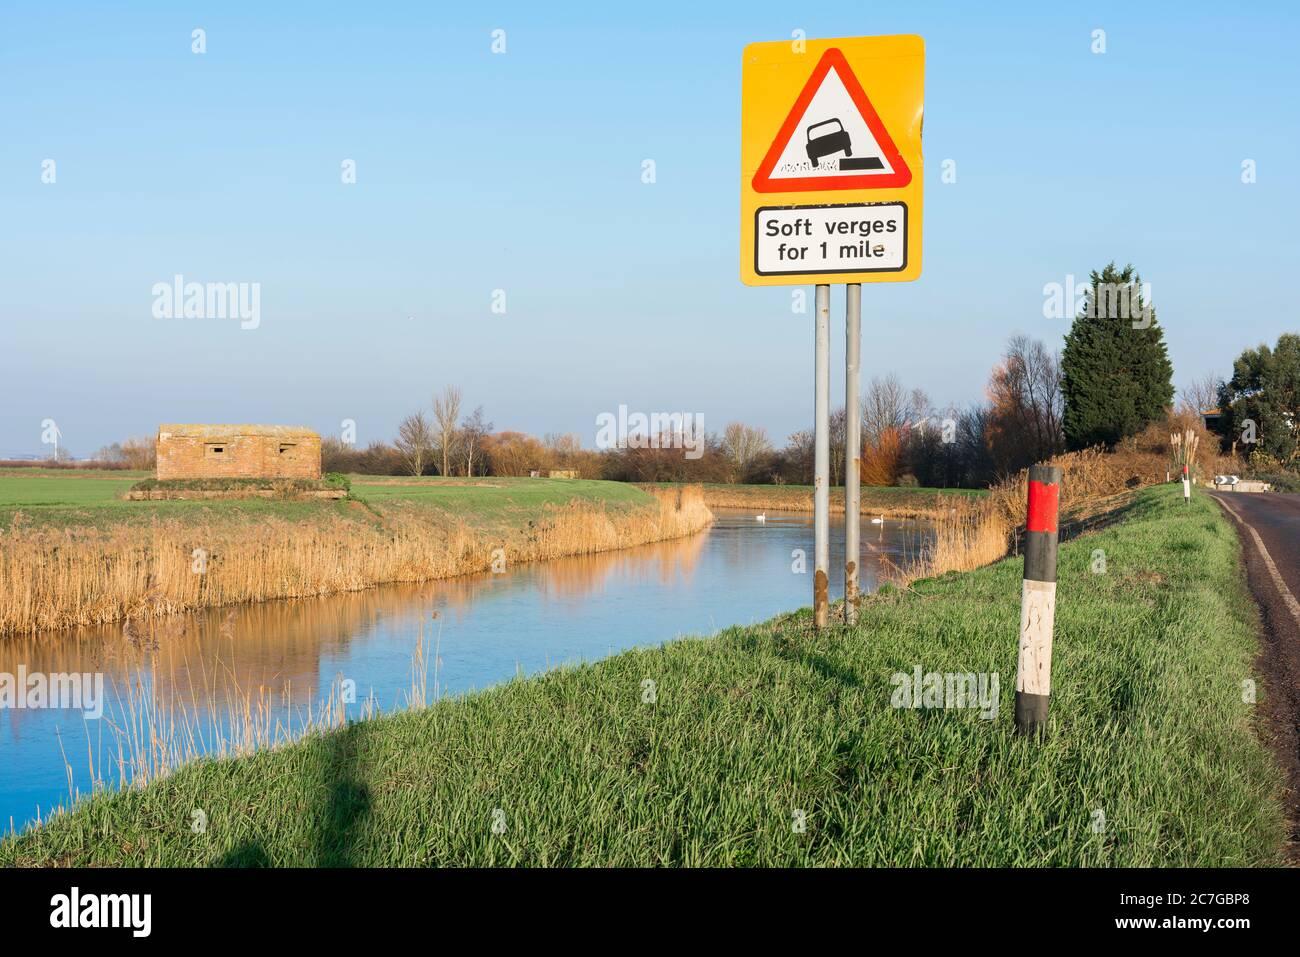 Danger road sign, view of a sign warning of risk of vehicles slipping into a fenland waterway at Benwick in Cambridgeshire, England, UK Stock Photo